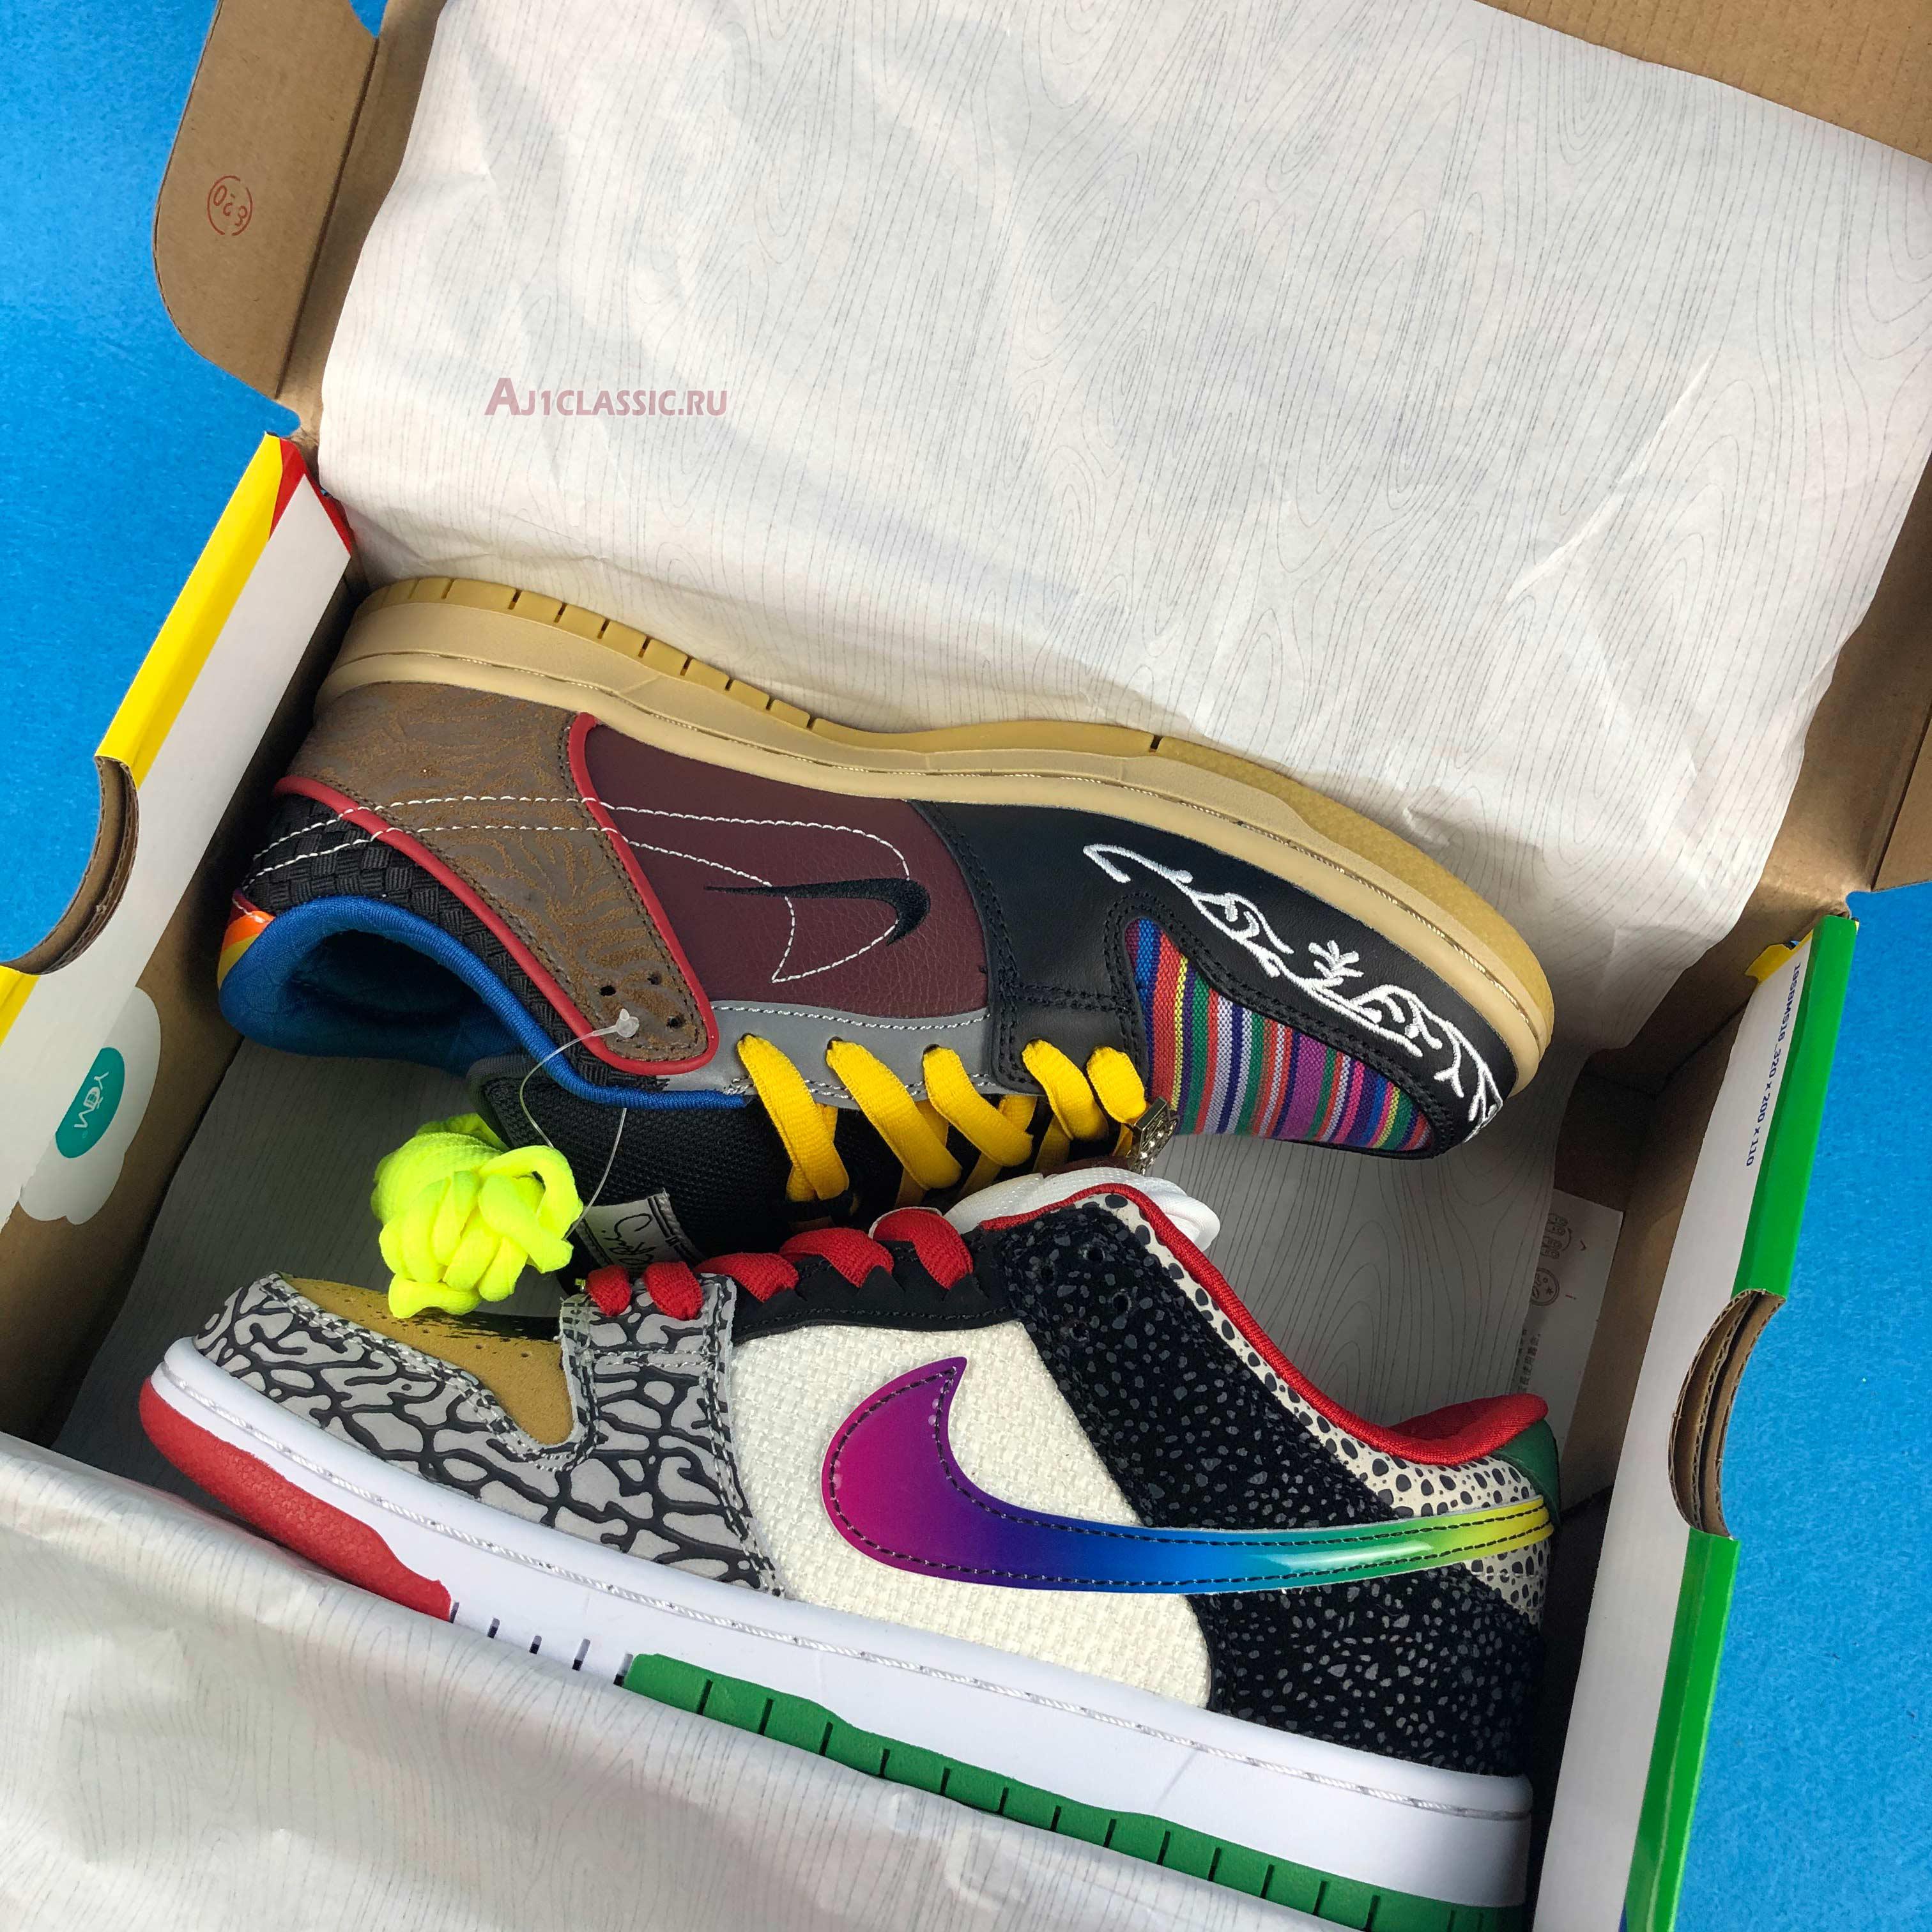 Nike Dunk Low SB What The Paul CZ2239-600 Multi-Color/Multi-Color Sneakers